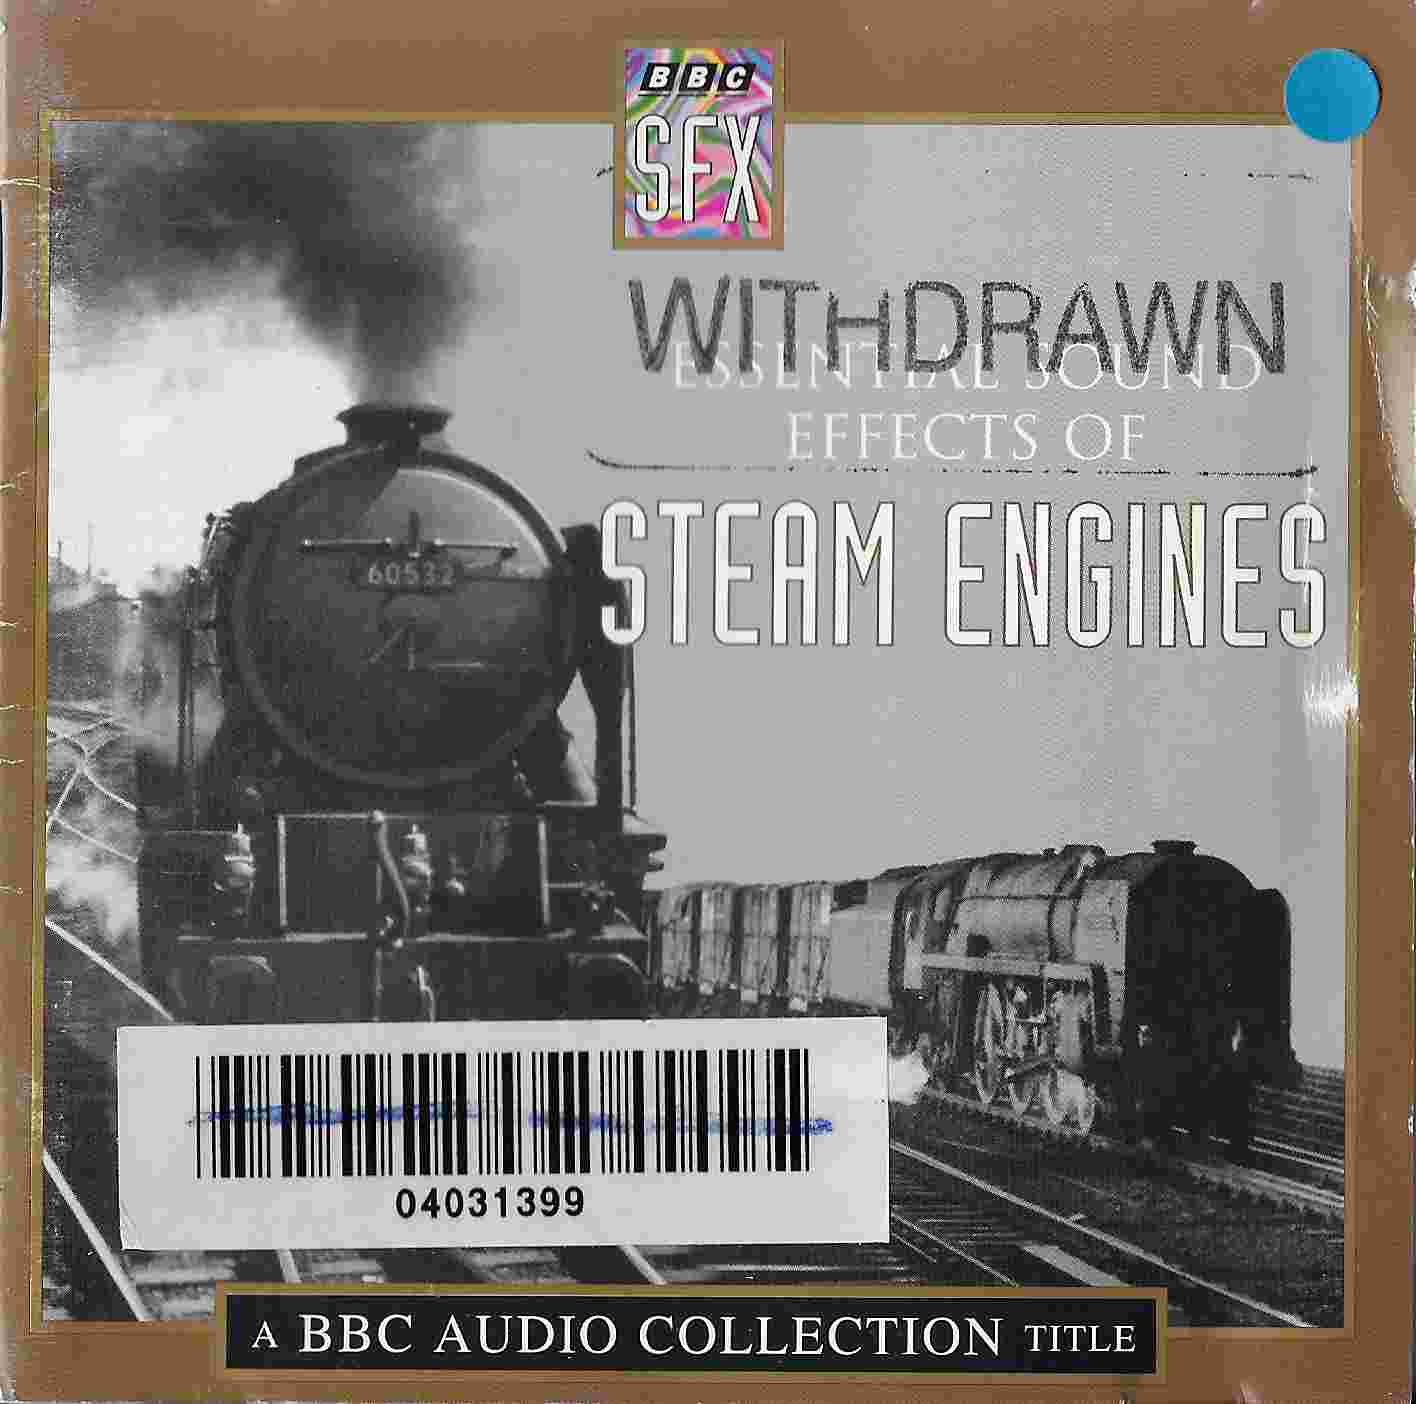 Picture of BBCCD872 Essential sound effects of steam engines by artist Various from the BBC cds - Records and Tapes library